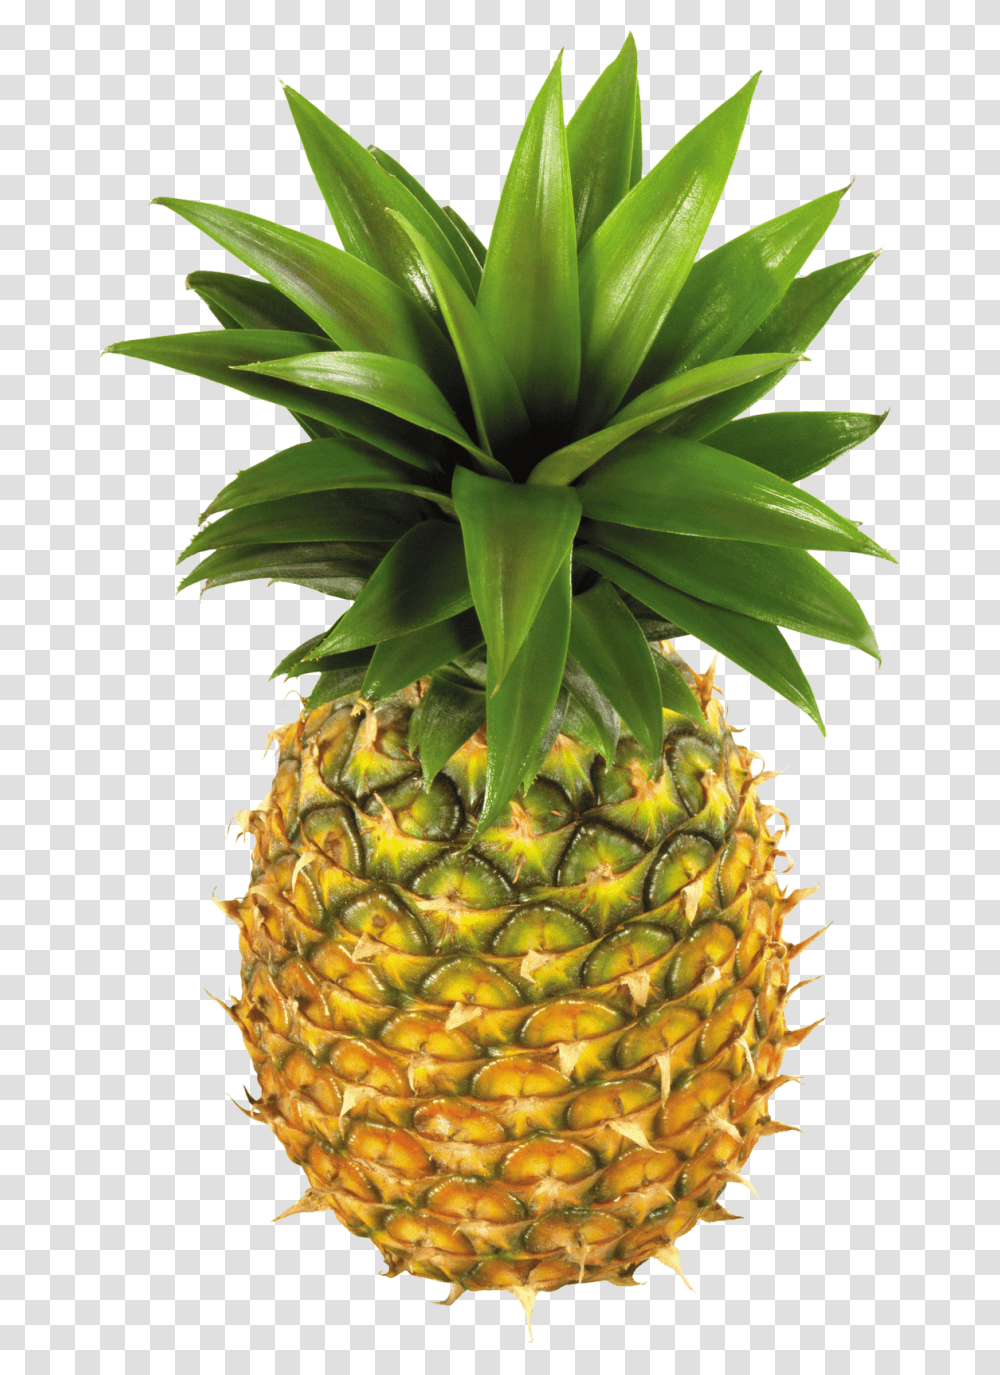 Pineapple Image Pineapples, Plant, Fruit, Food Transparent Png